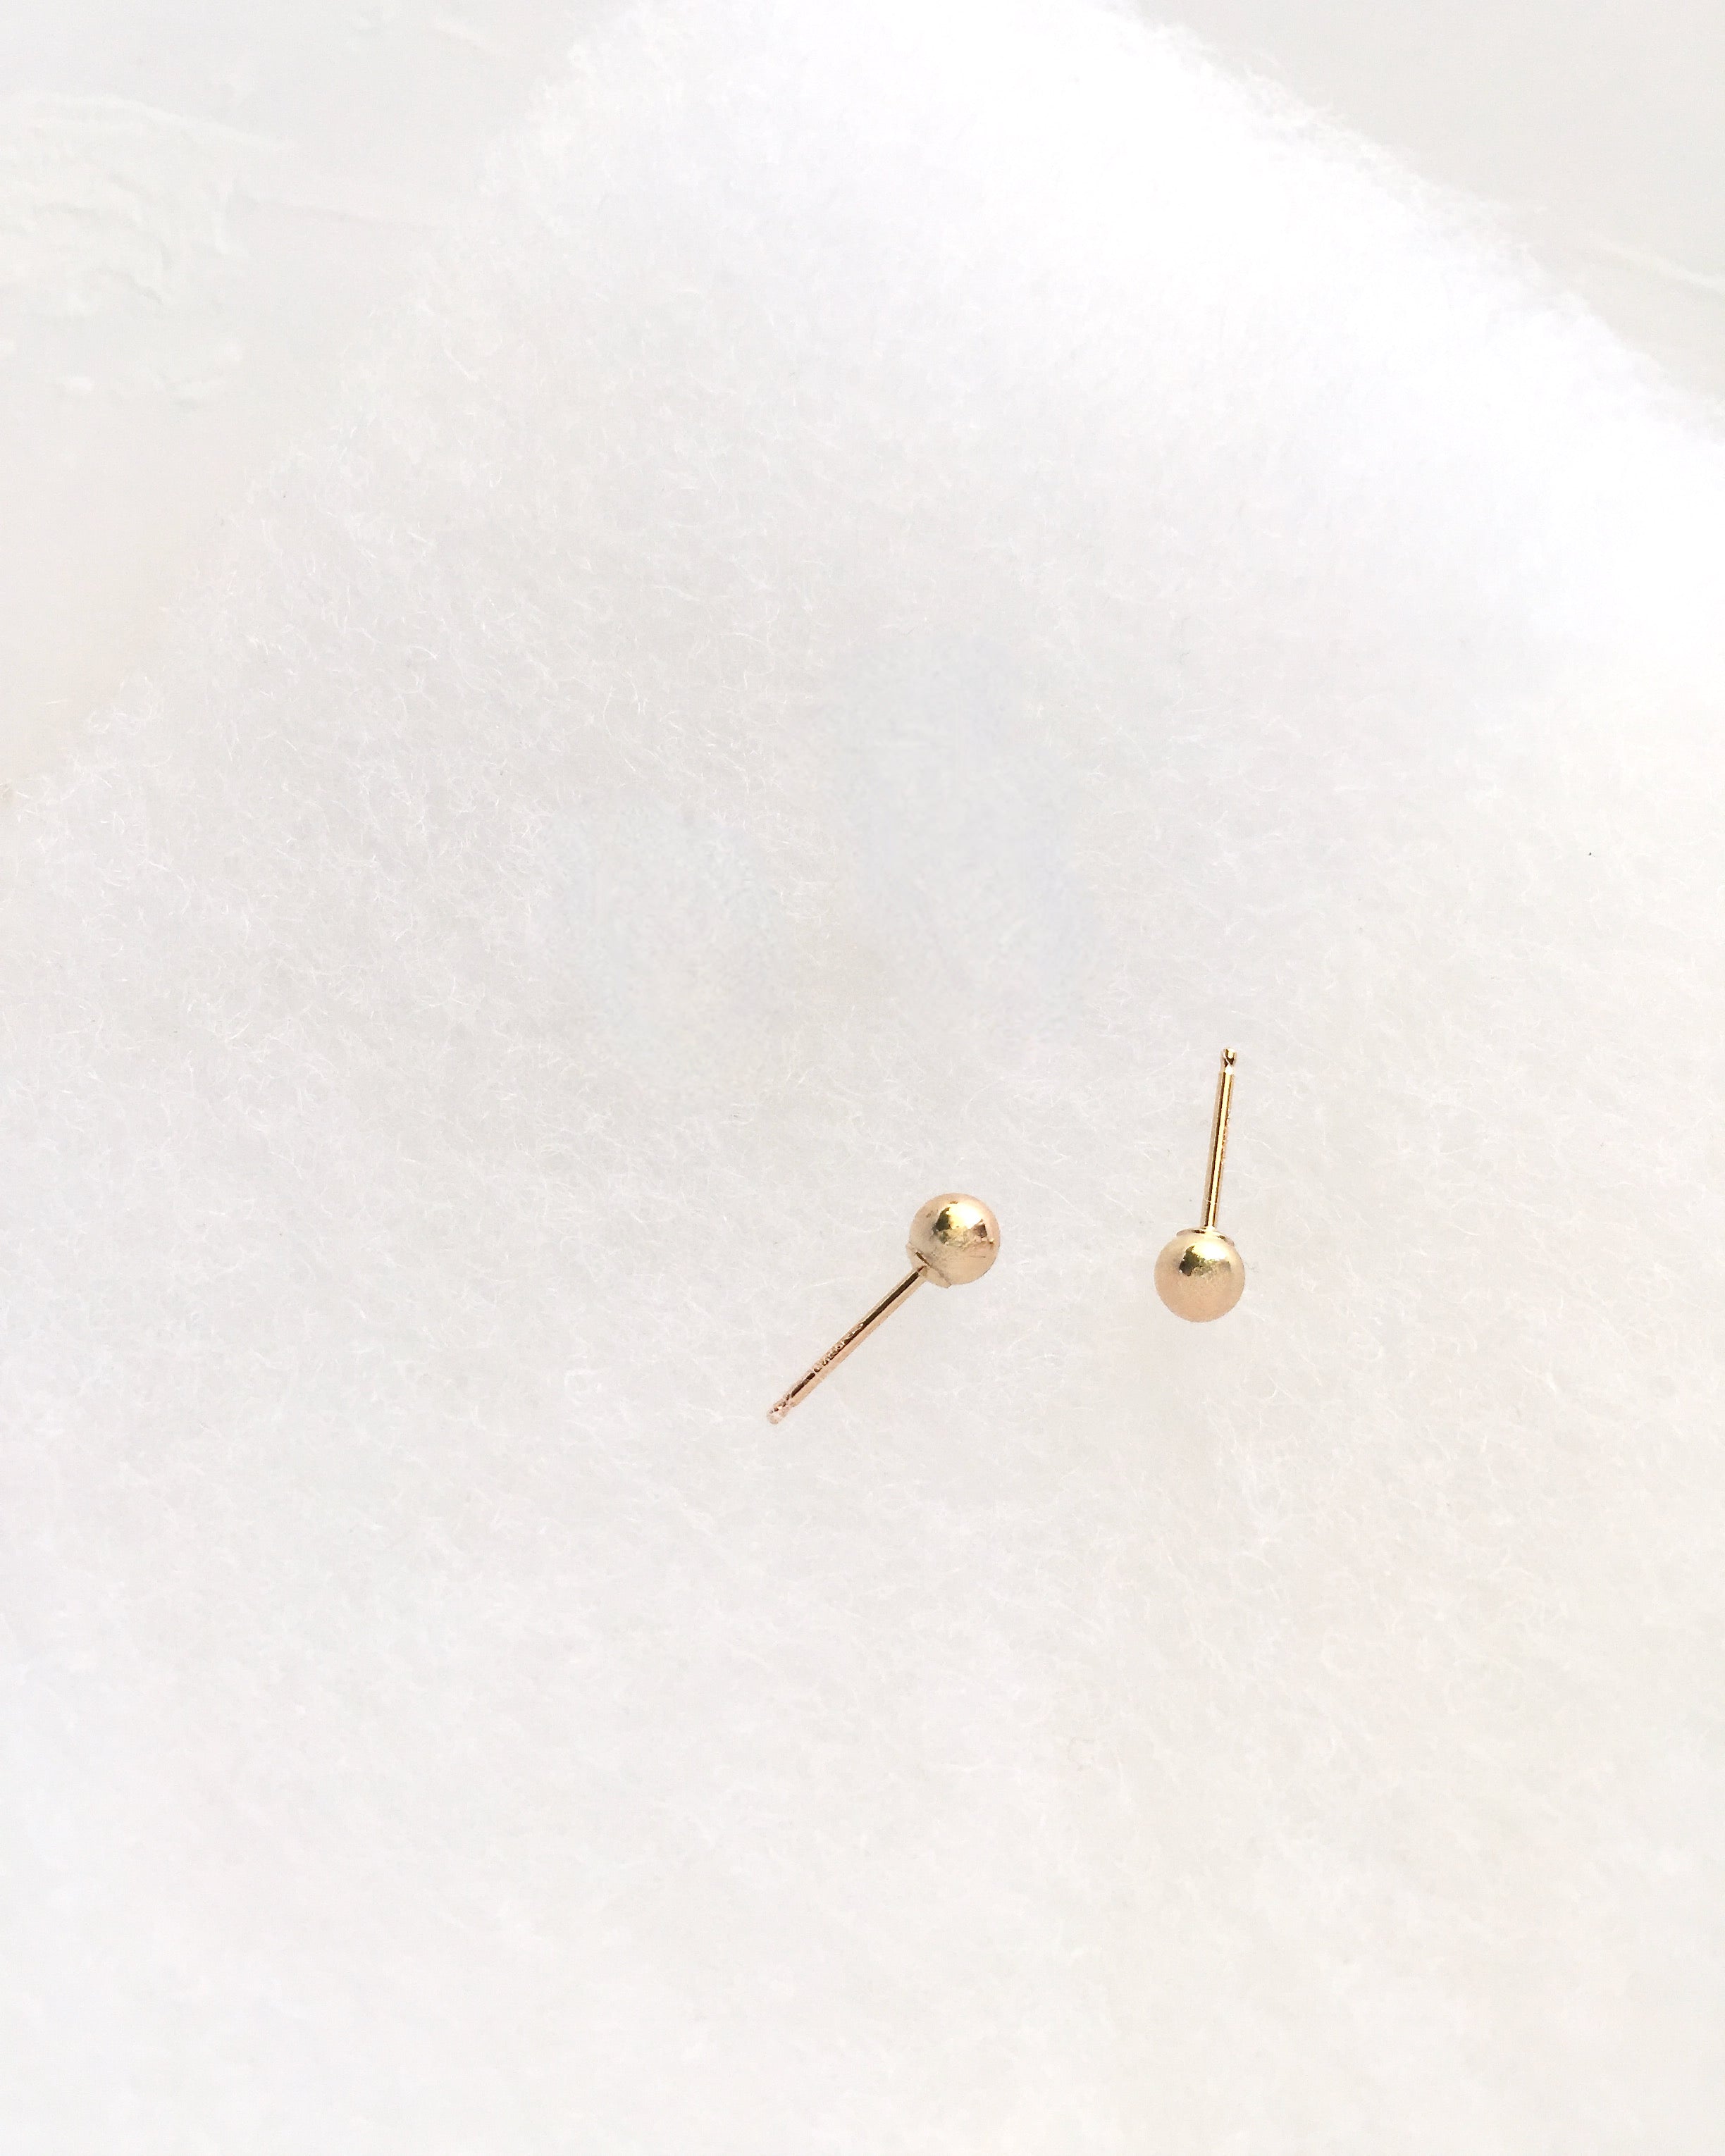 KIKICHIC | NYC | Dainty Minimalist Jewelry | Small Heart Shape Stud Earrings  Second Piercing in Silver, Rose Gold and 18k Gold